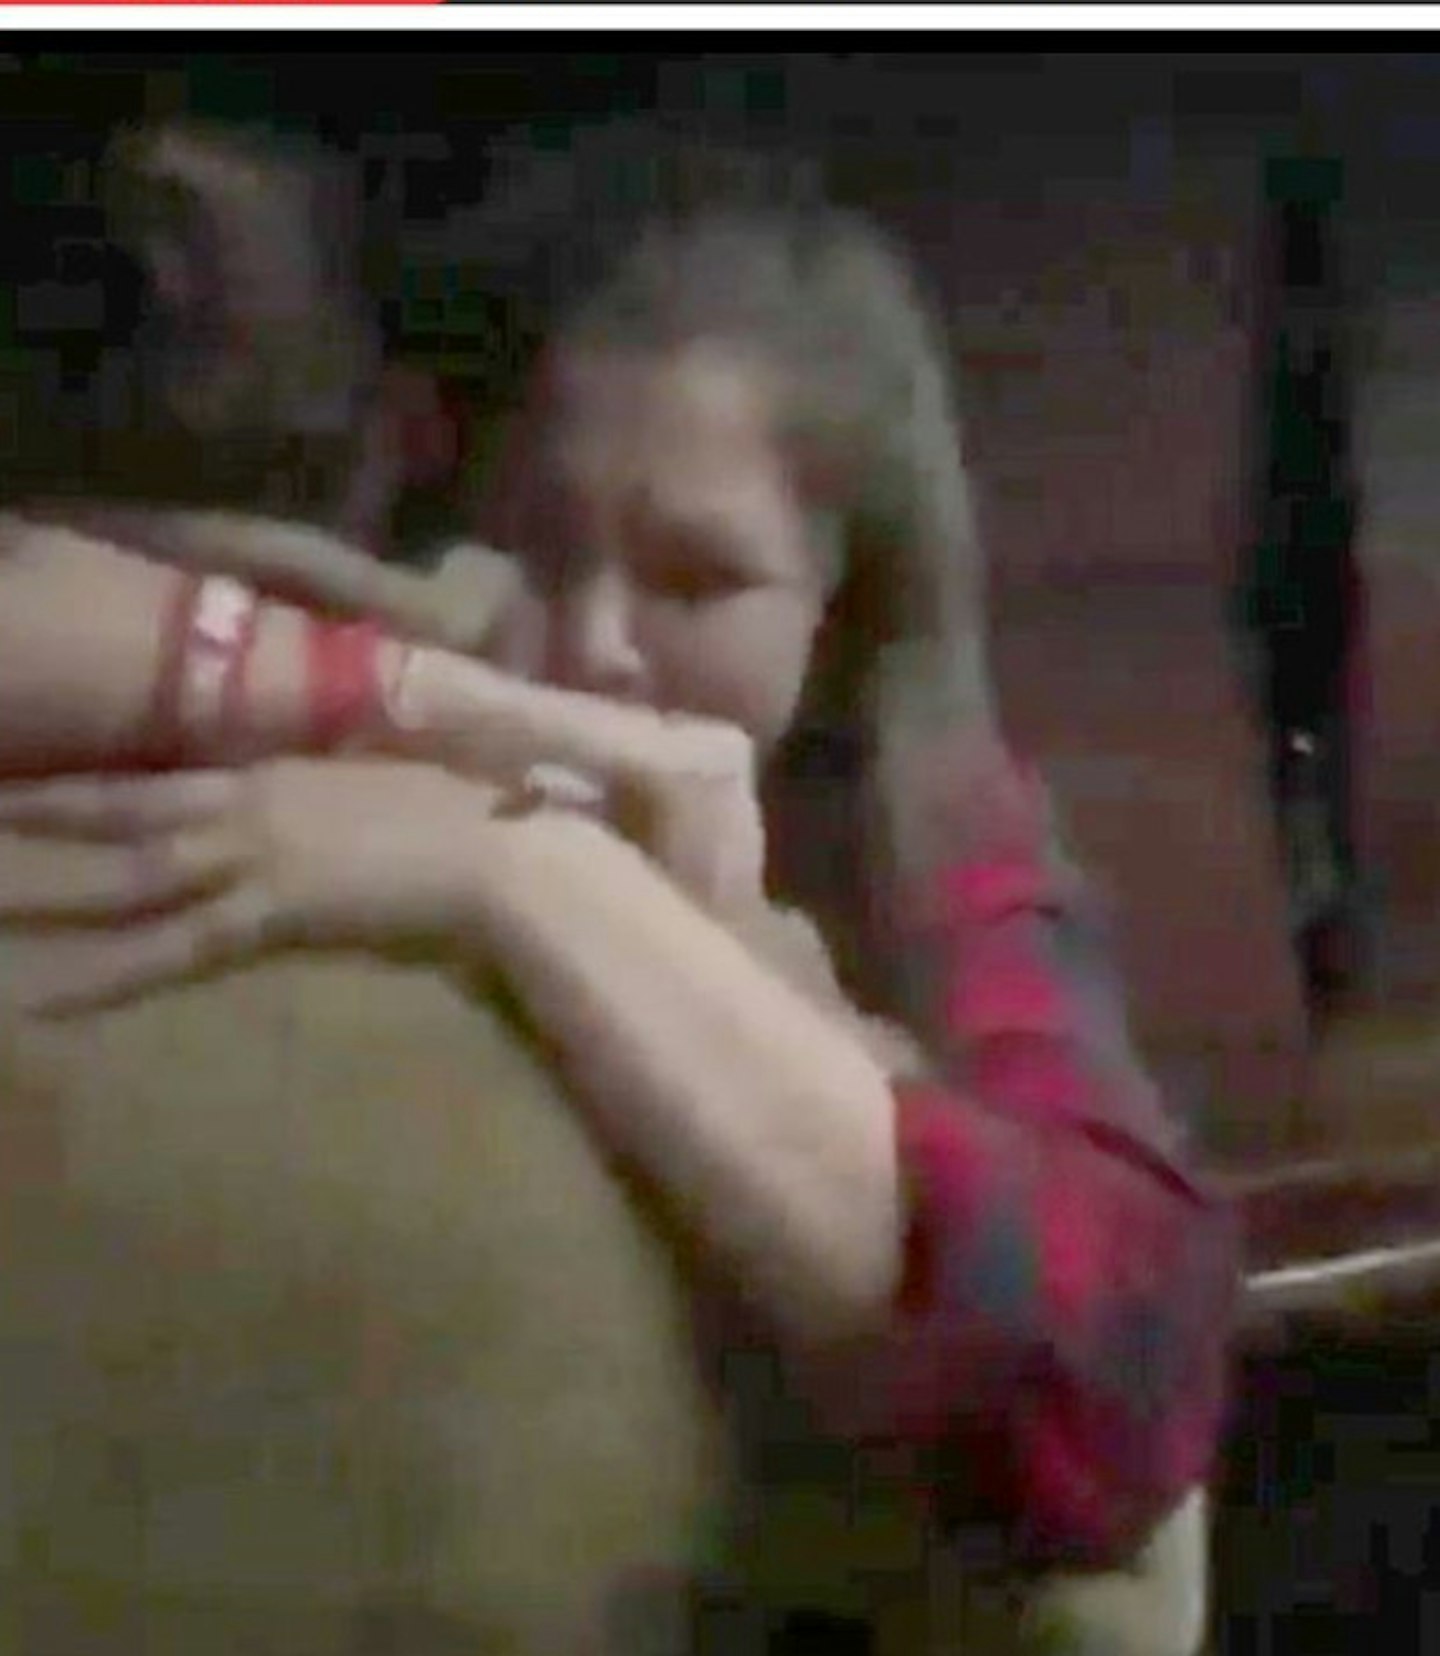 Harry's magical embrace ended the poor girl's panic attack